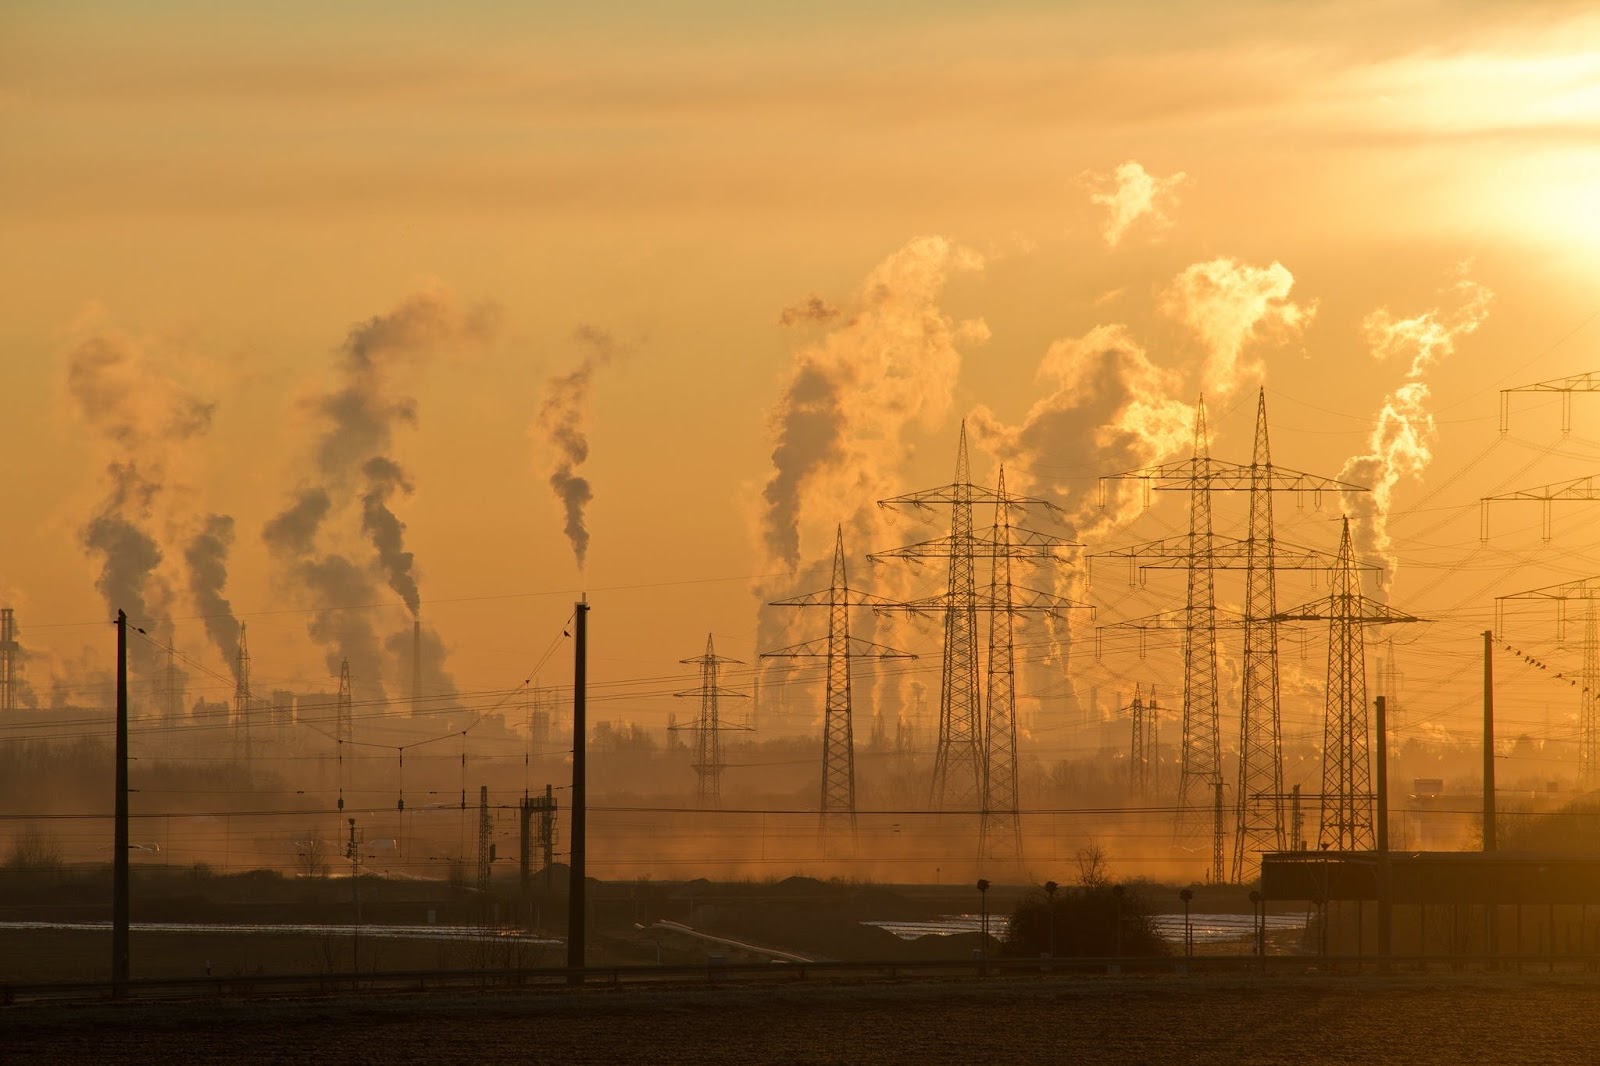 carbon emissions and pylons at sunrise which are being reduced as part of net zero initiatives